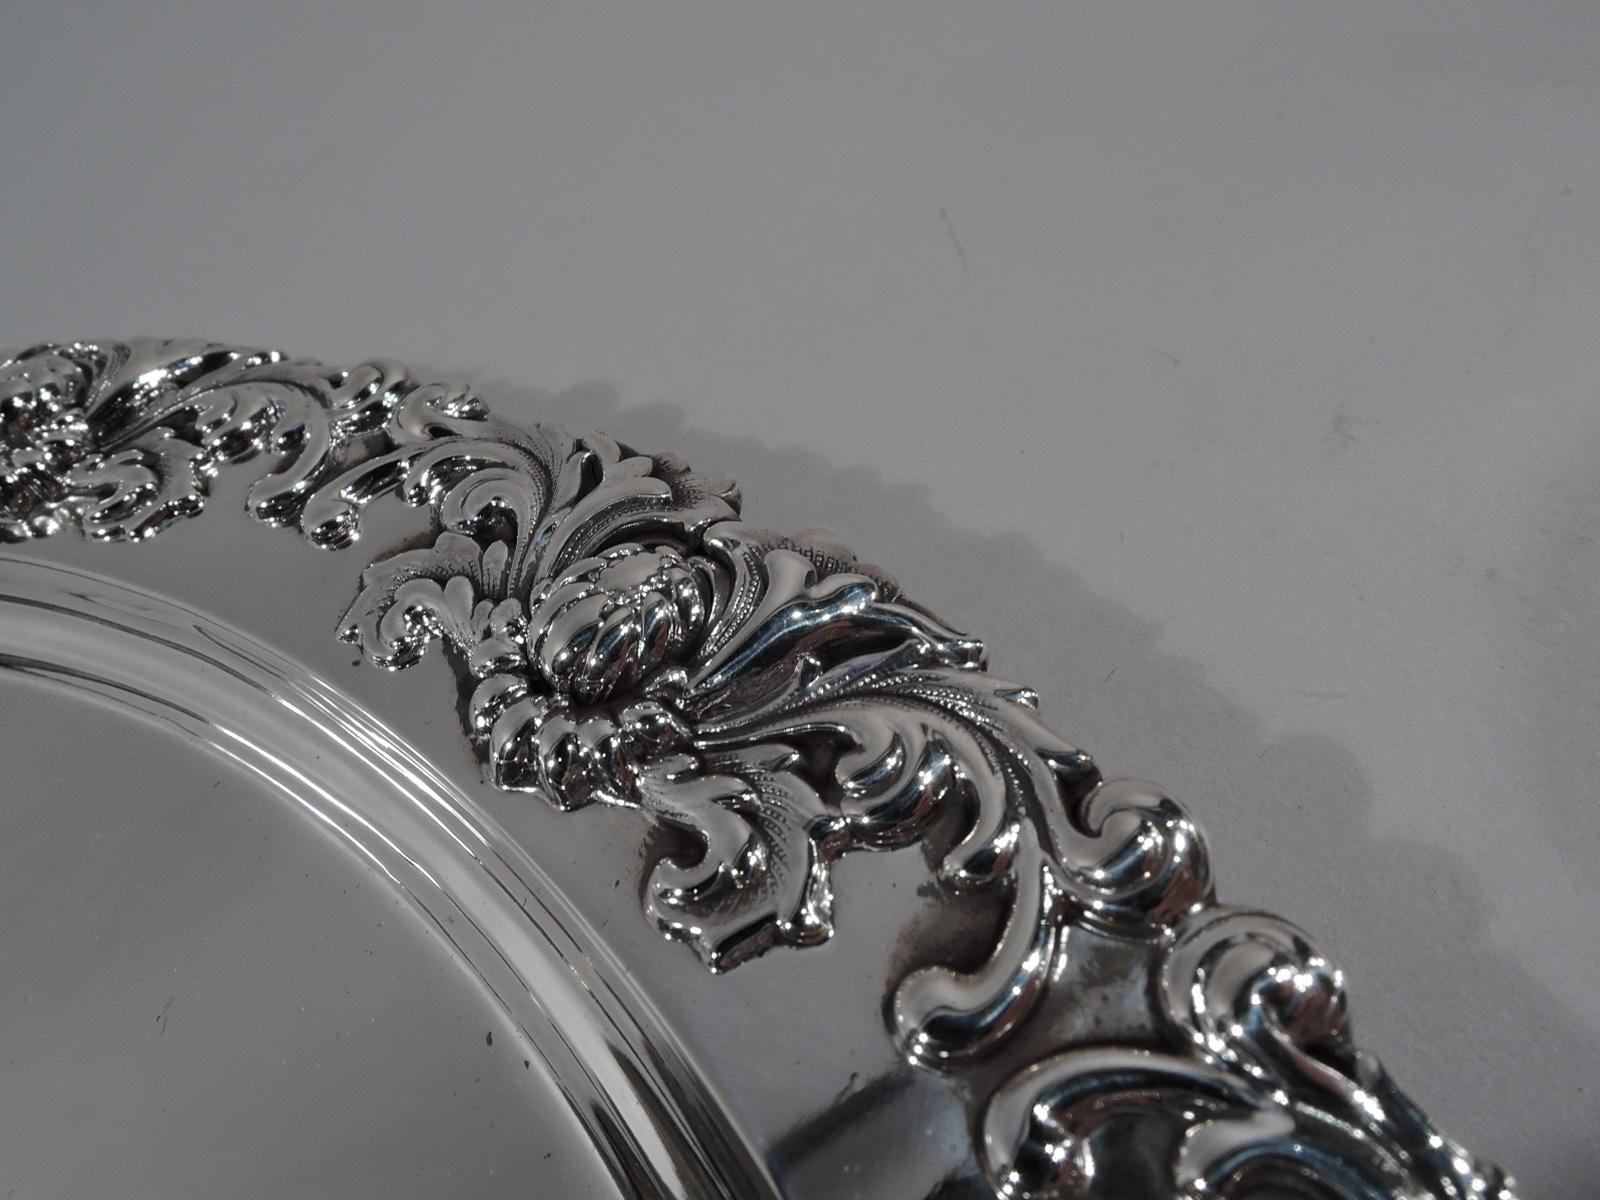 Chrysanthemum sterling silver serving tray. Made by Tiffany & Co. in New York. Round with deep well. Flat and narrow shoulder with applied rim ornament comprising buds in leafing scrolls. Striking and tactile. Fully marked including pattern no. 5766